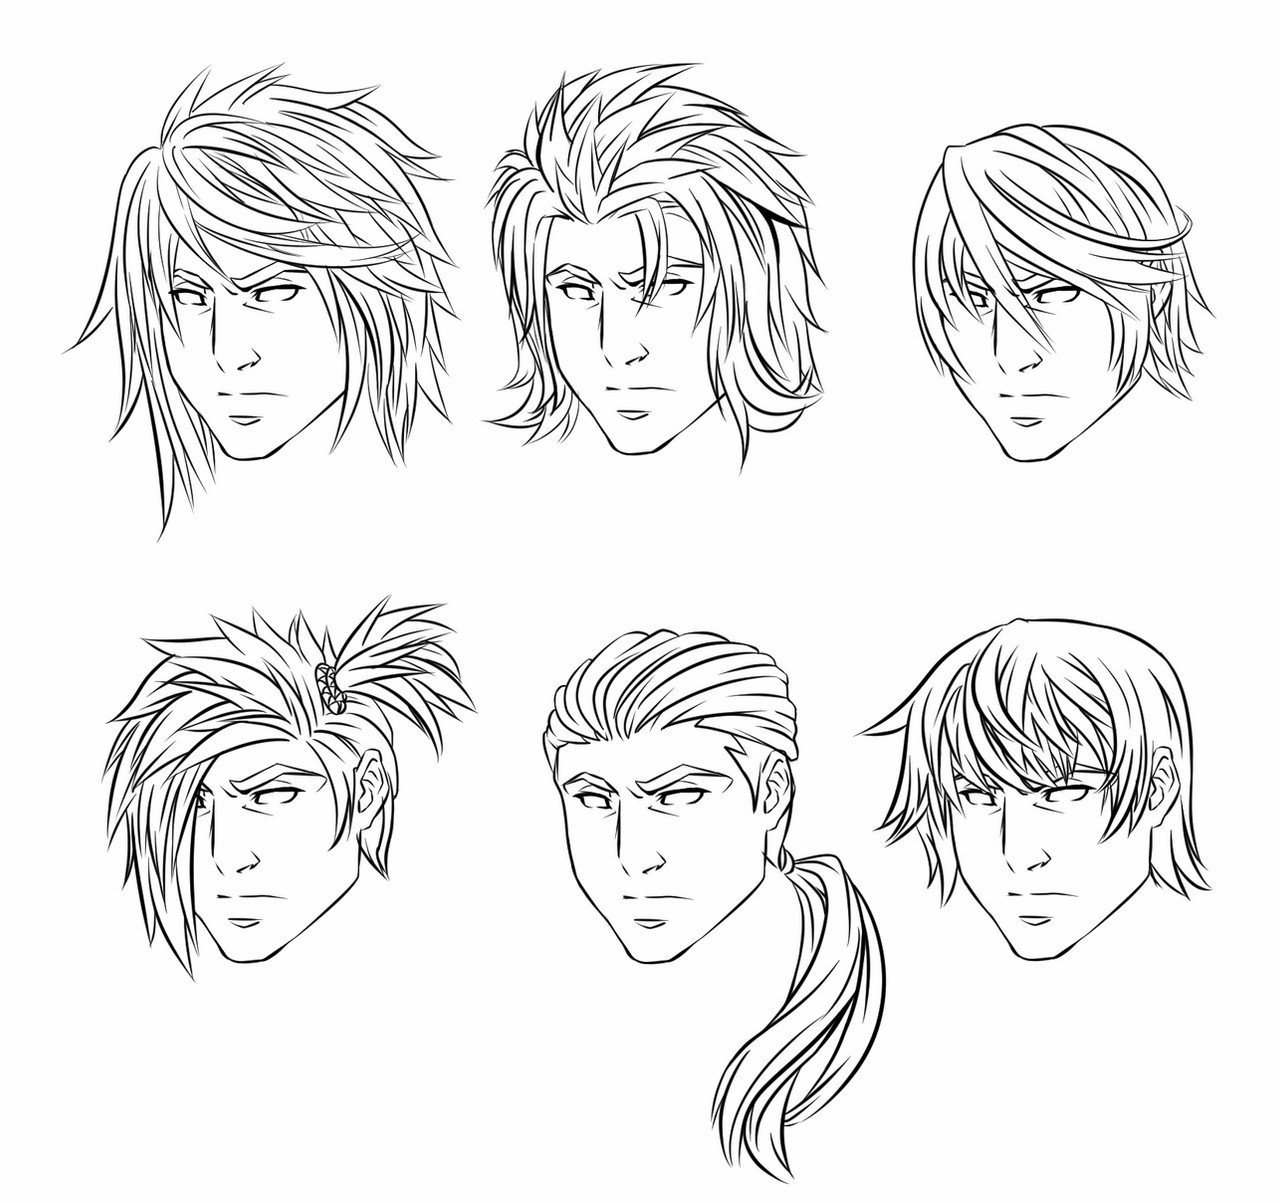 Anime Long Hairstyles Male
 Anime Male Hairstyles by CrimsonCypher on DeviantArt